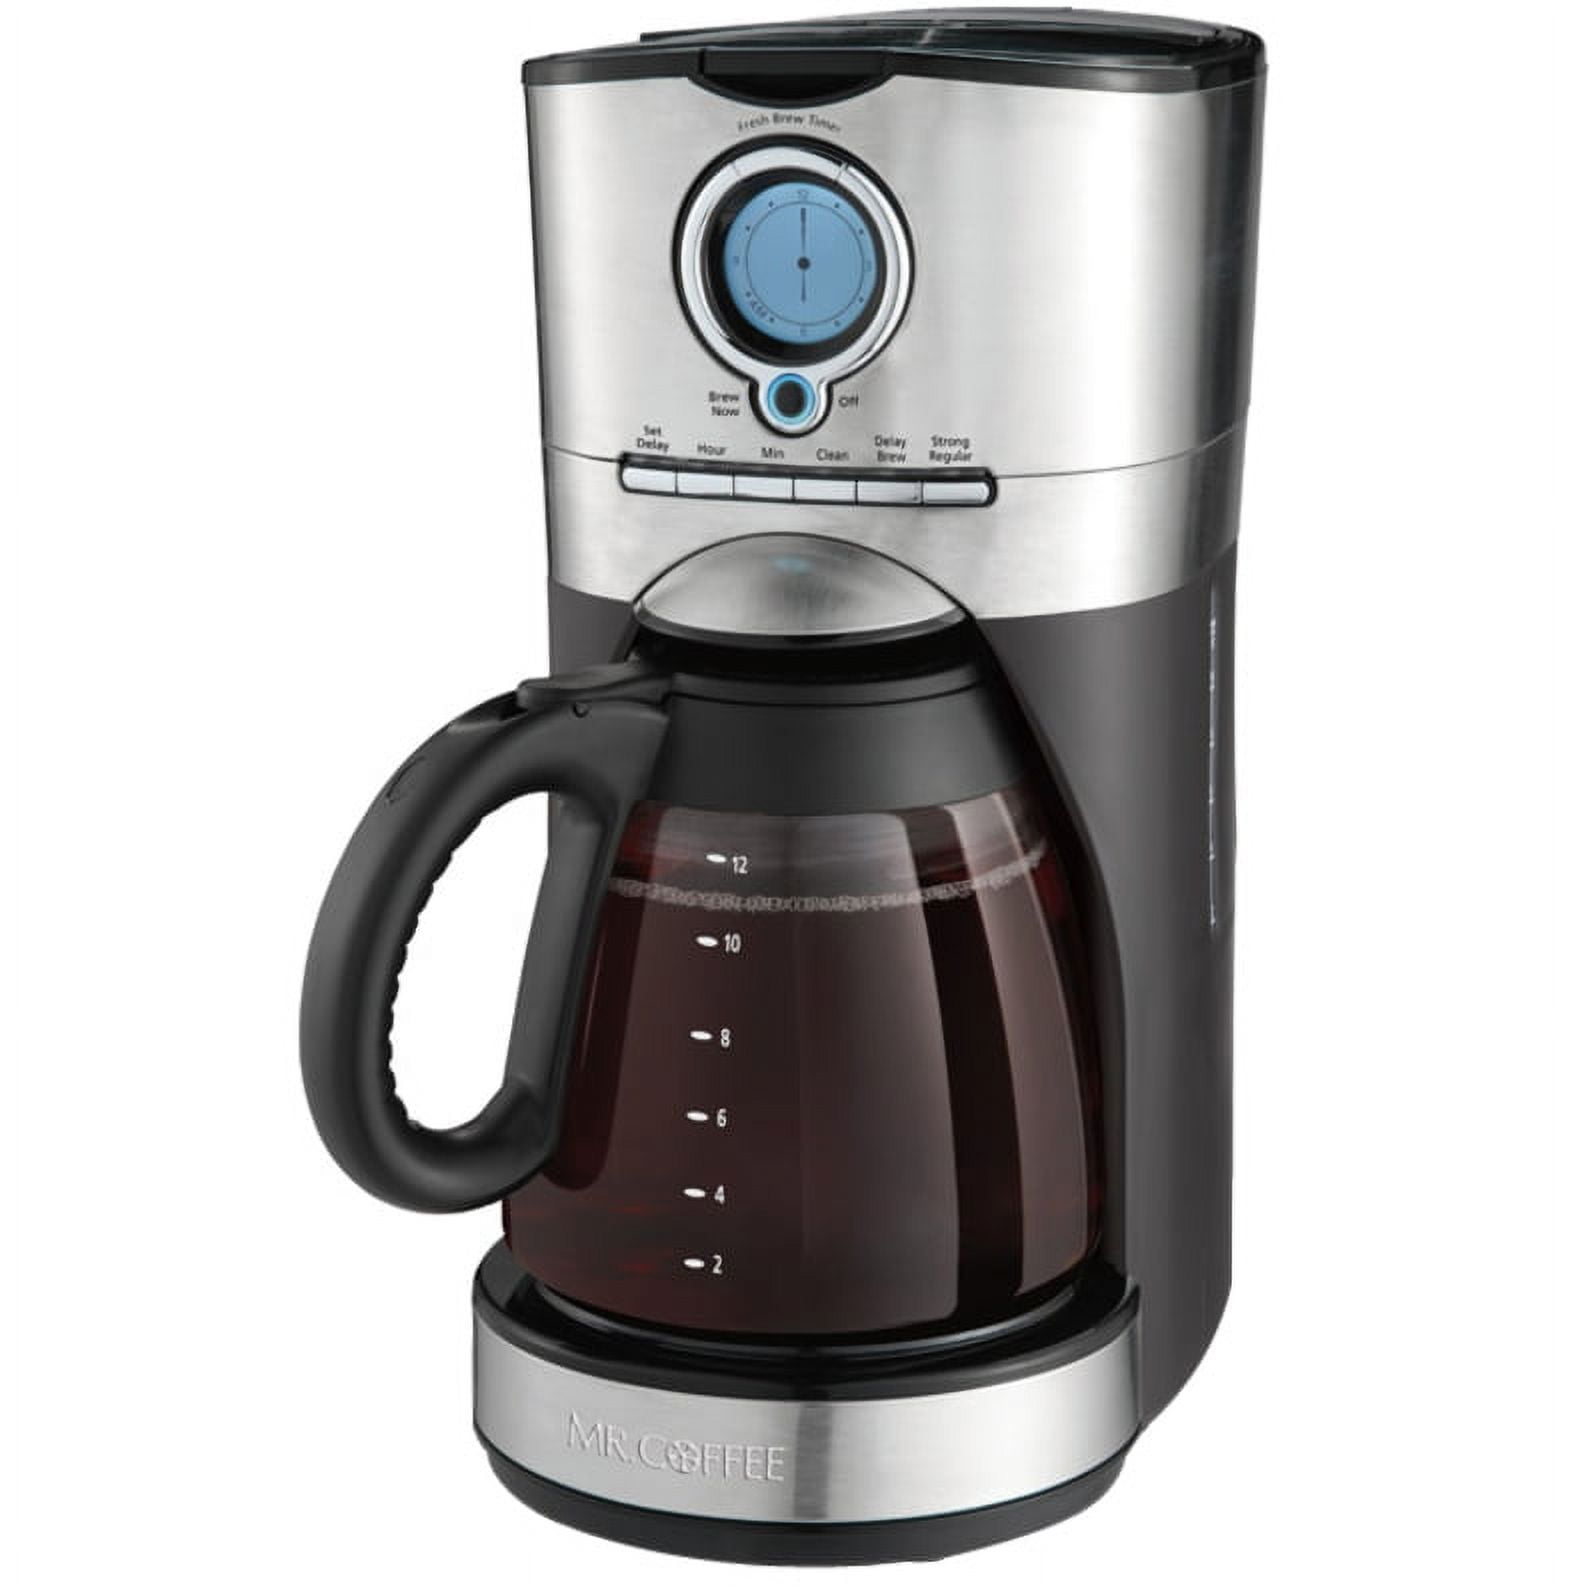 Mr. Coffee 12-cup Programmable Coffee Maker - Black/stainless